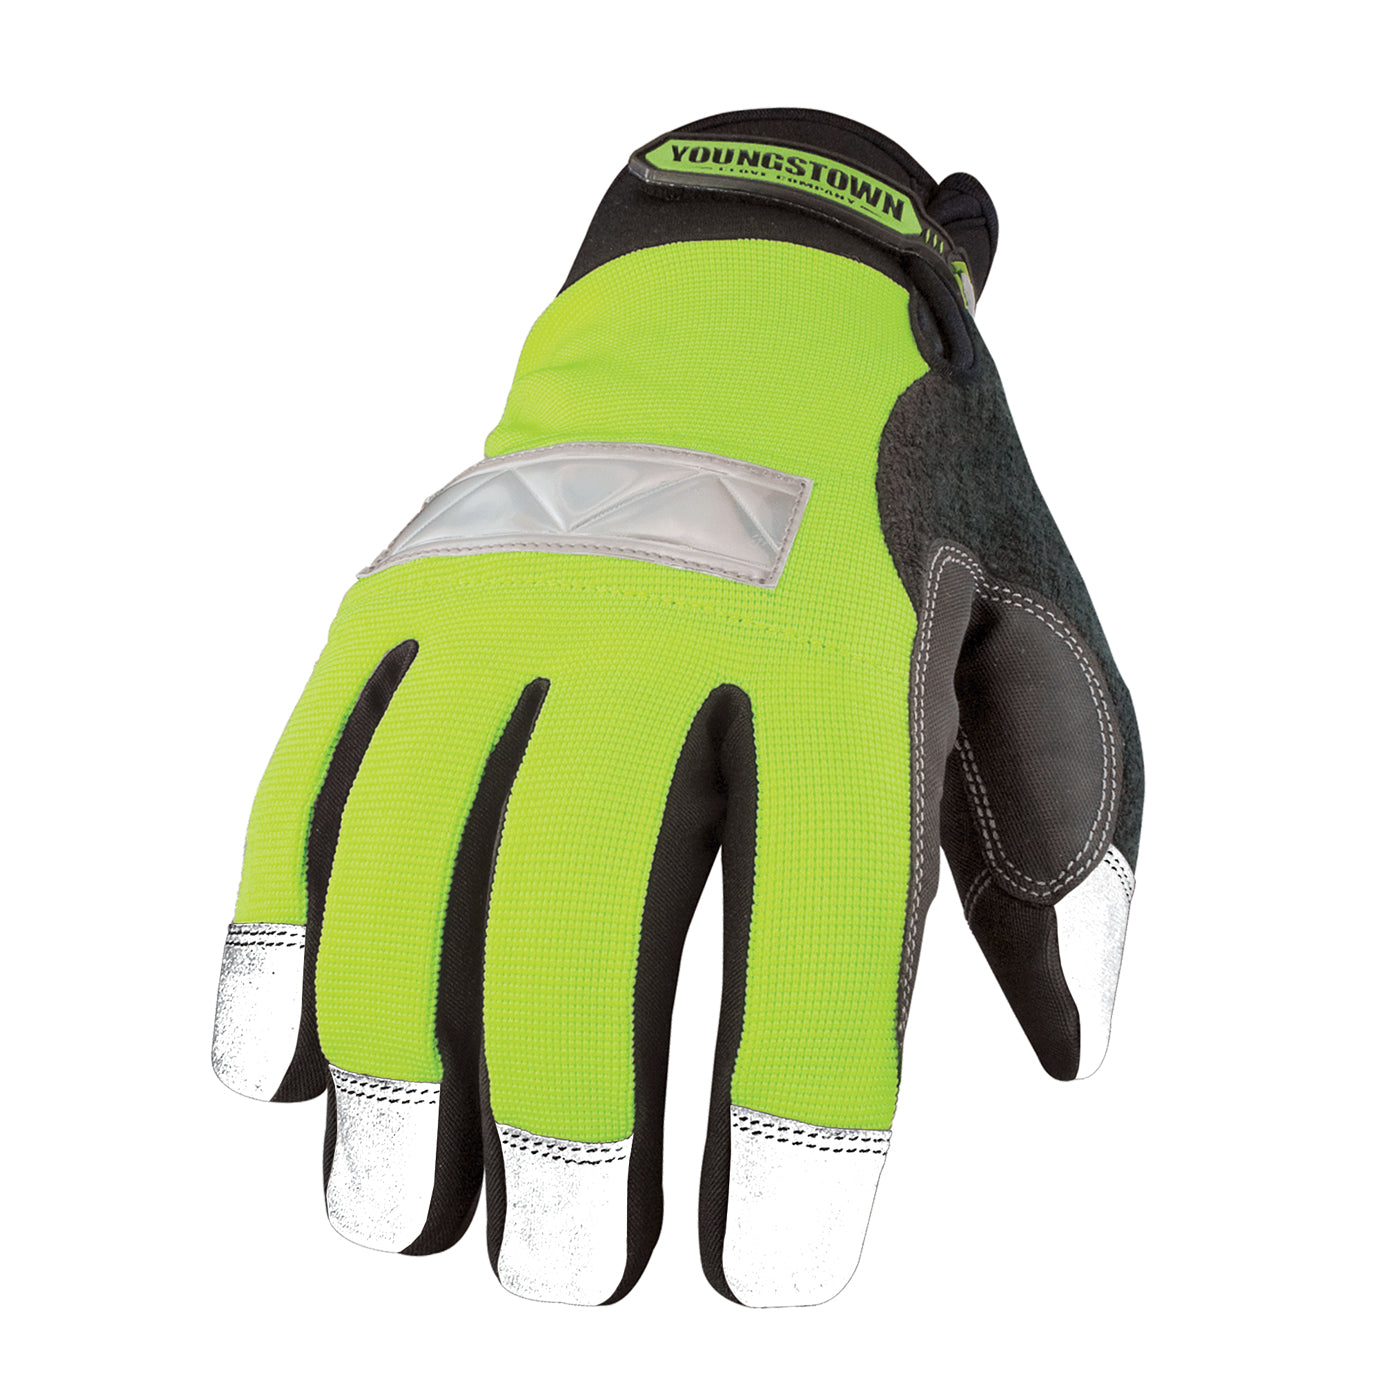 Red Steer® Chilly Grip® Gray, Water Resistant, Palm Coated Glove - The Glove  Warehouse